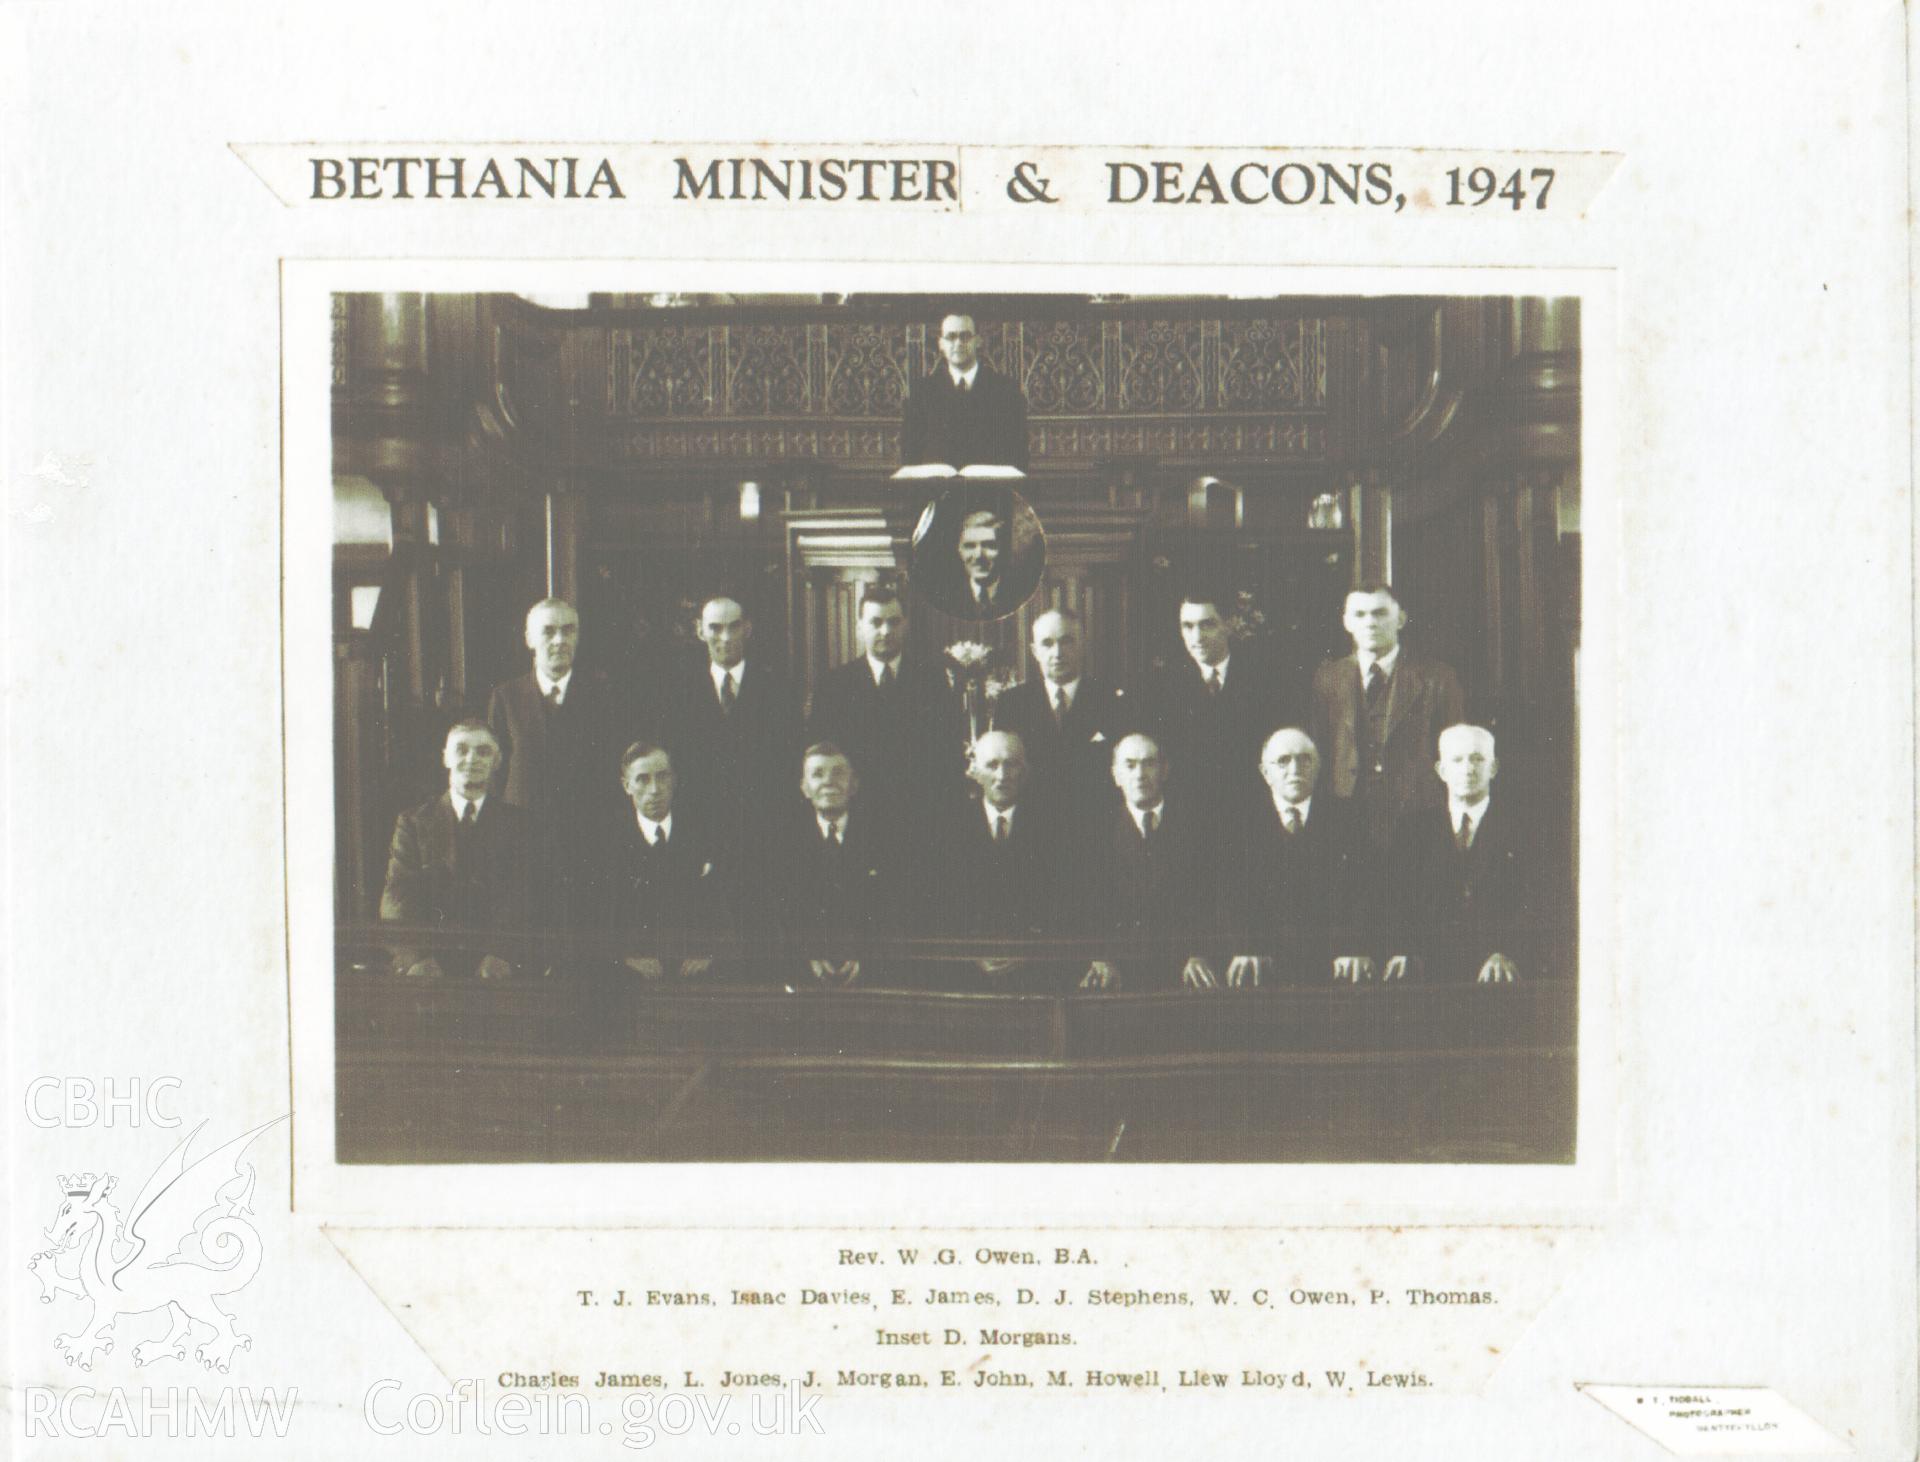 Black and white photograph of the Minister and Deacons at Bethania Chapel, Maesteg, 1947, with names listed below. Donated to the RCAHMW by Cyril Philips as part of the Digital Dissent Project.